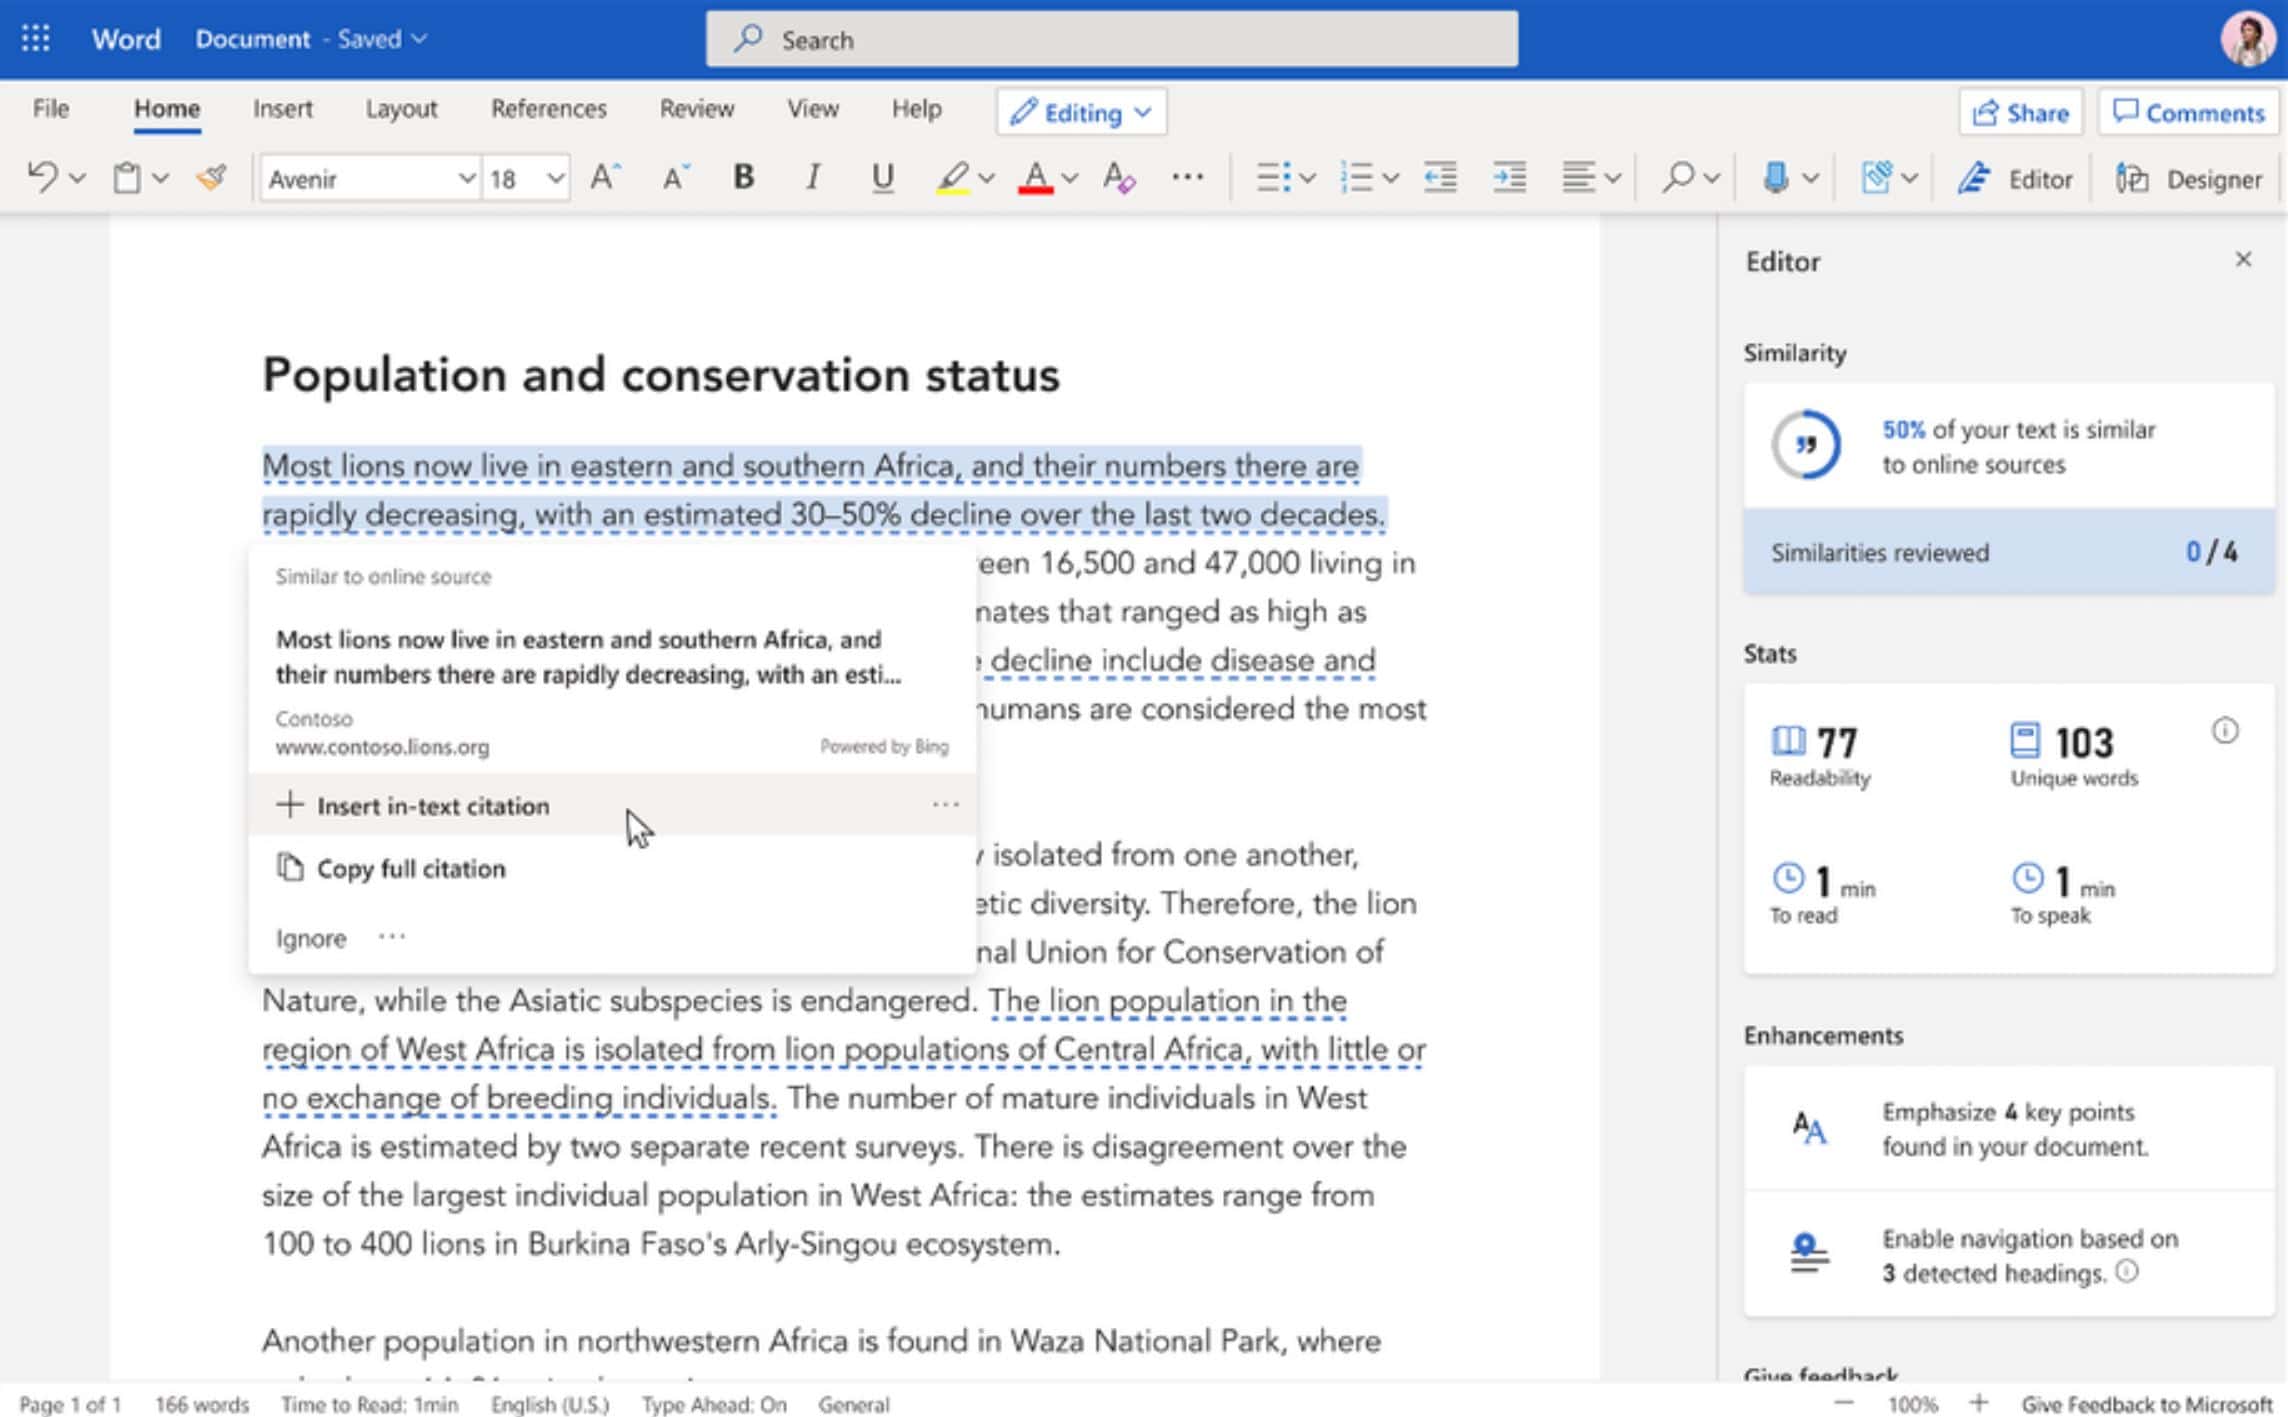 Microsoft Editor’s Similarity checker can tell how much content in your document is original